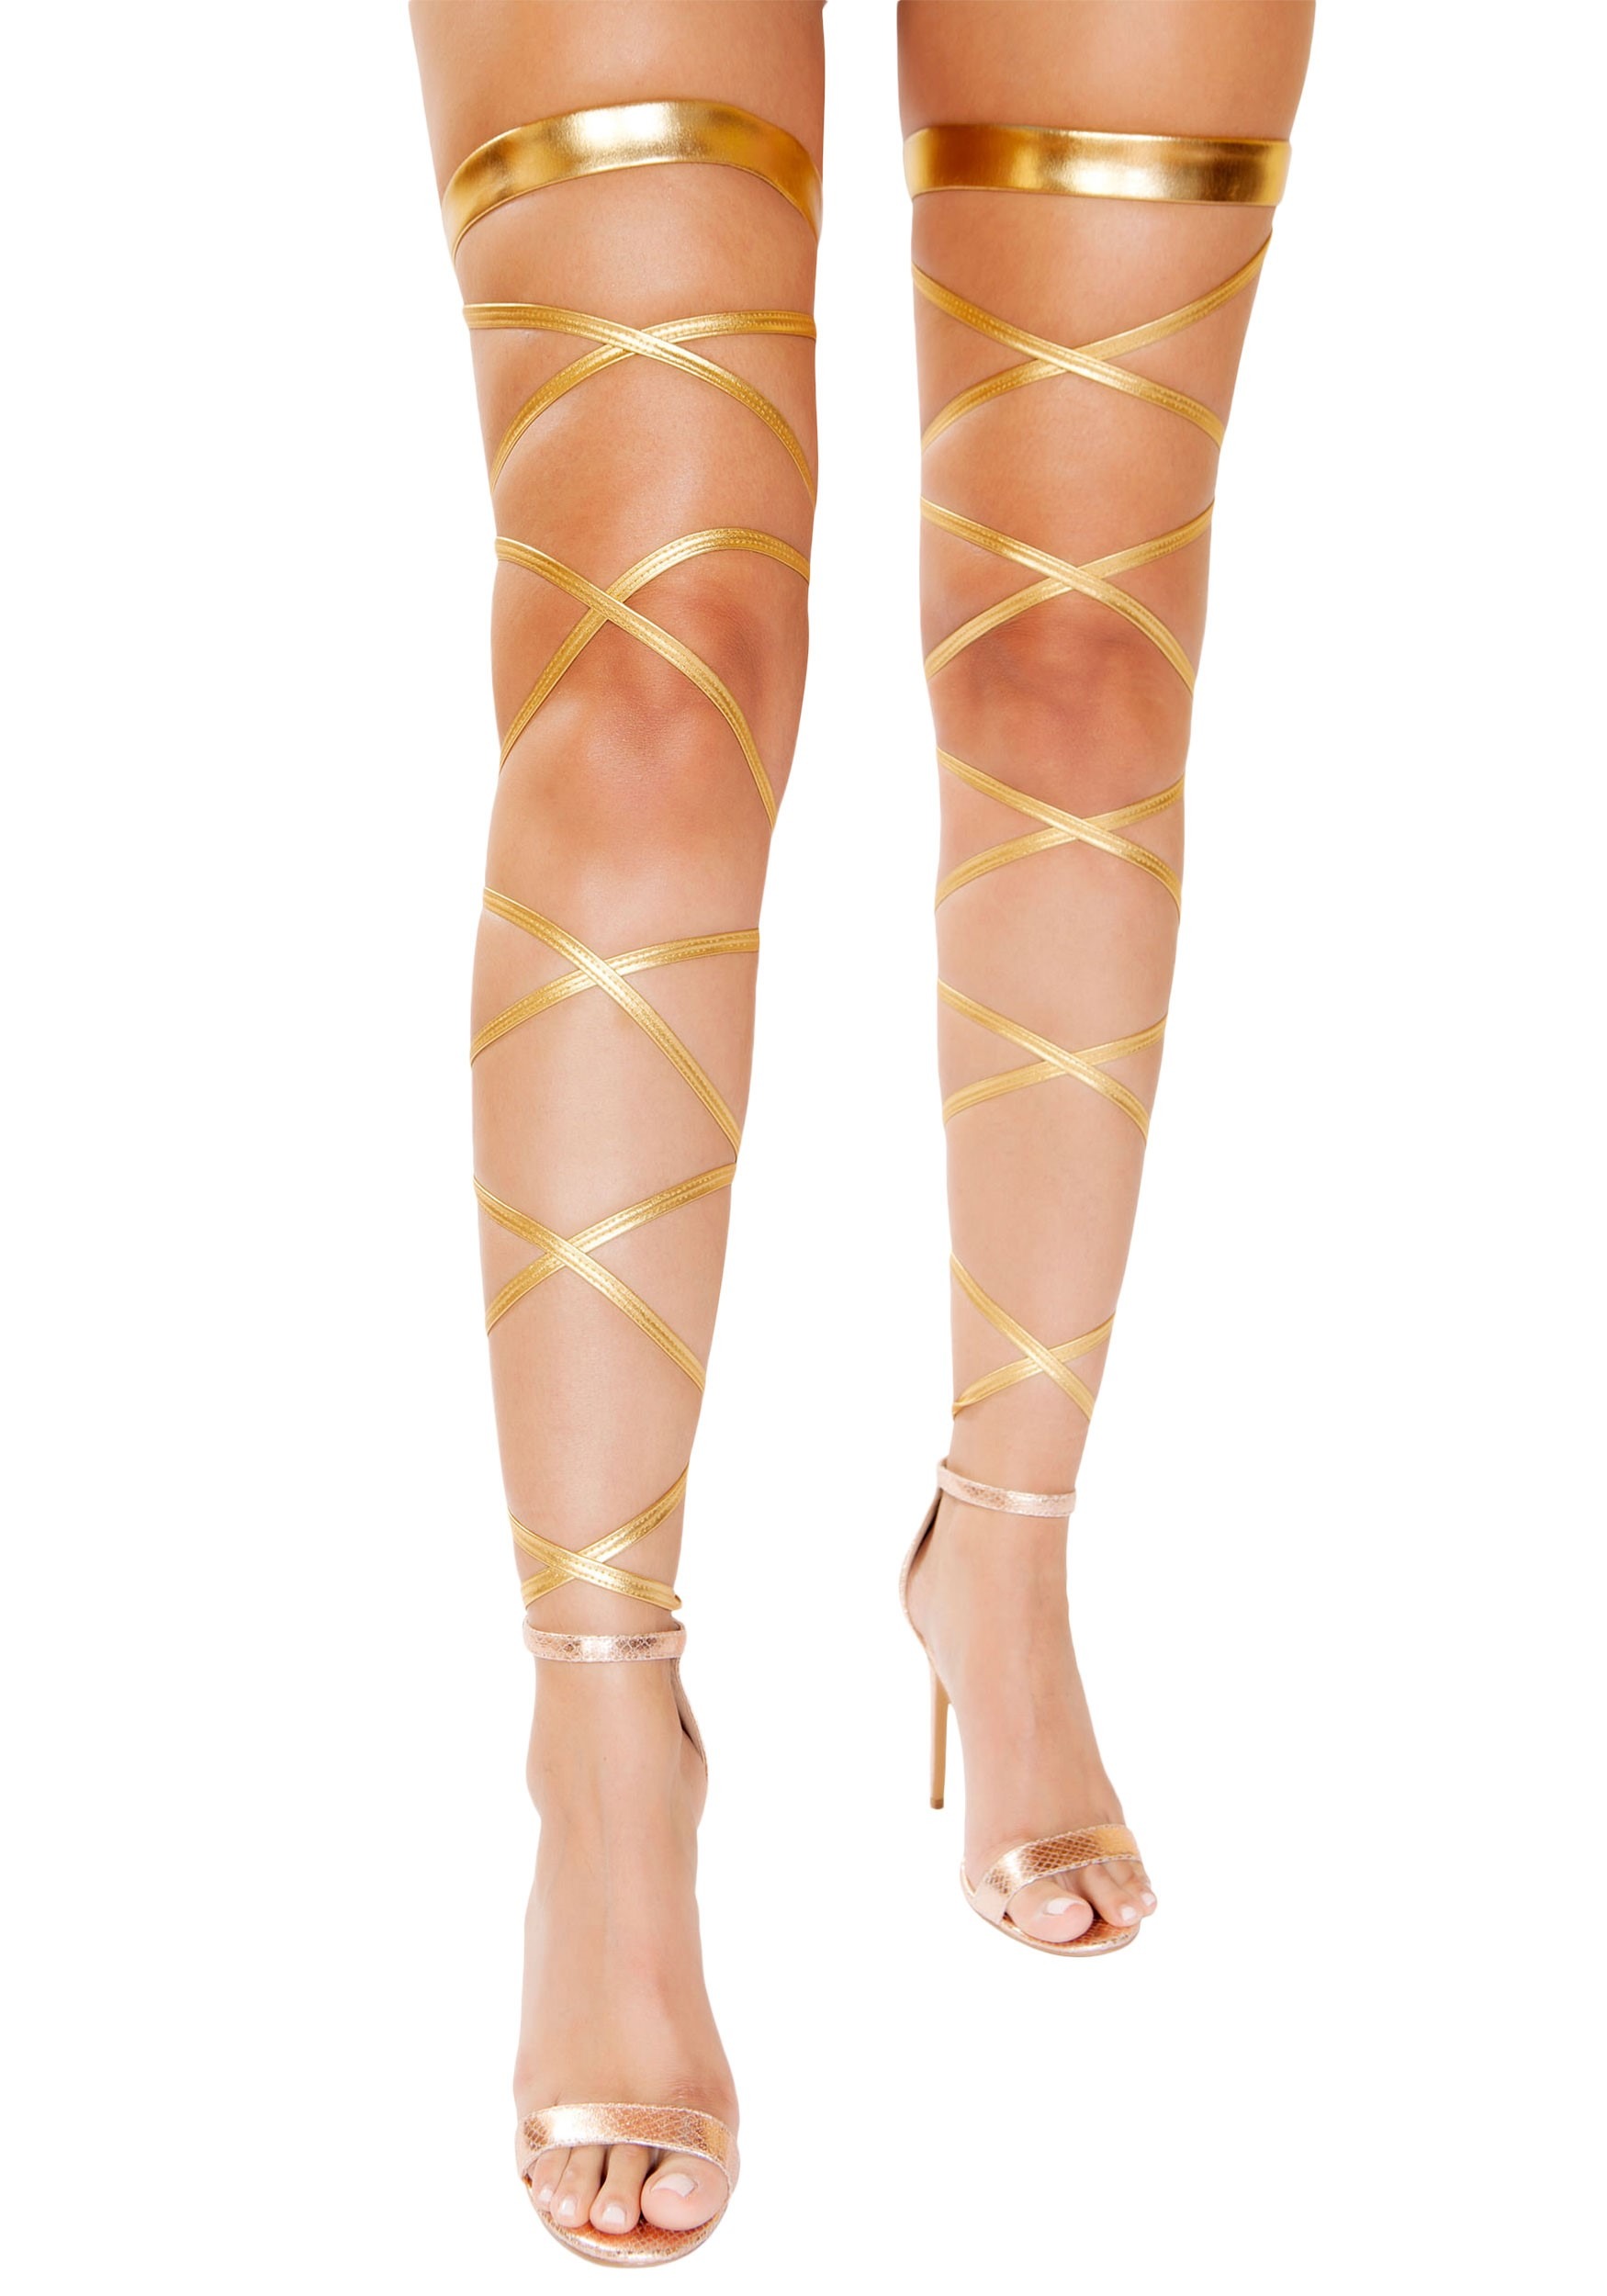 Goddess Leg Wraps, Gold, One Size, Wearable Costume Accessory for Halloween